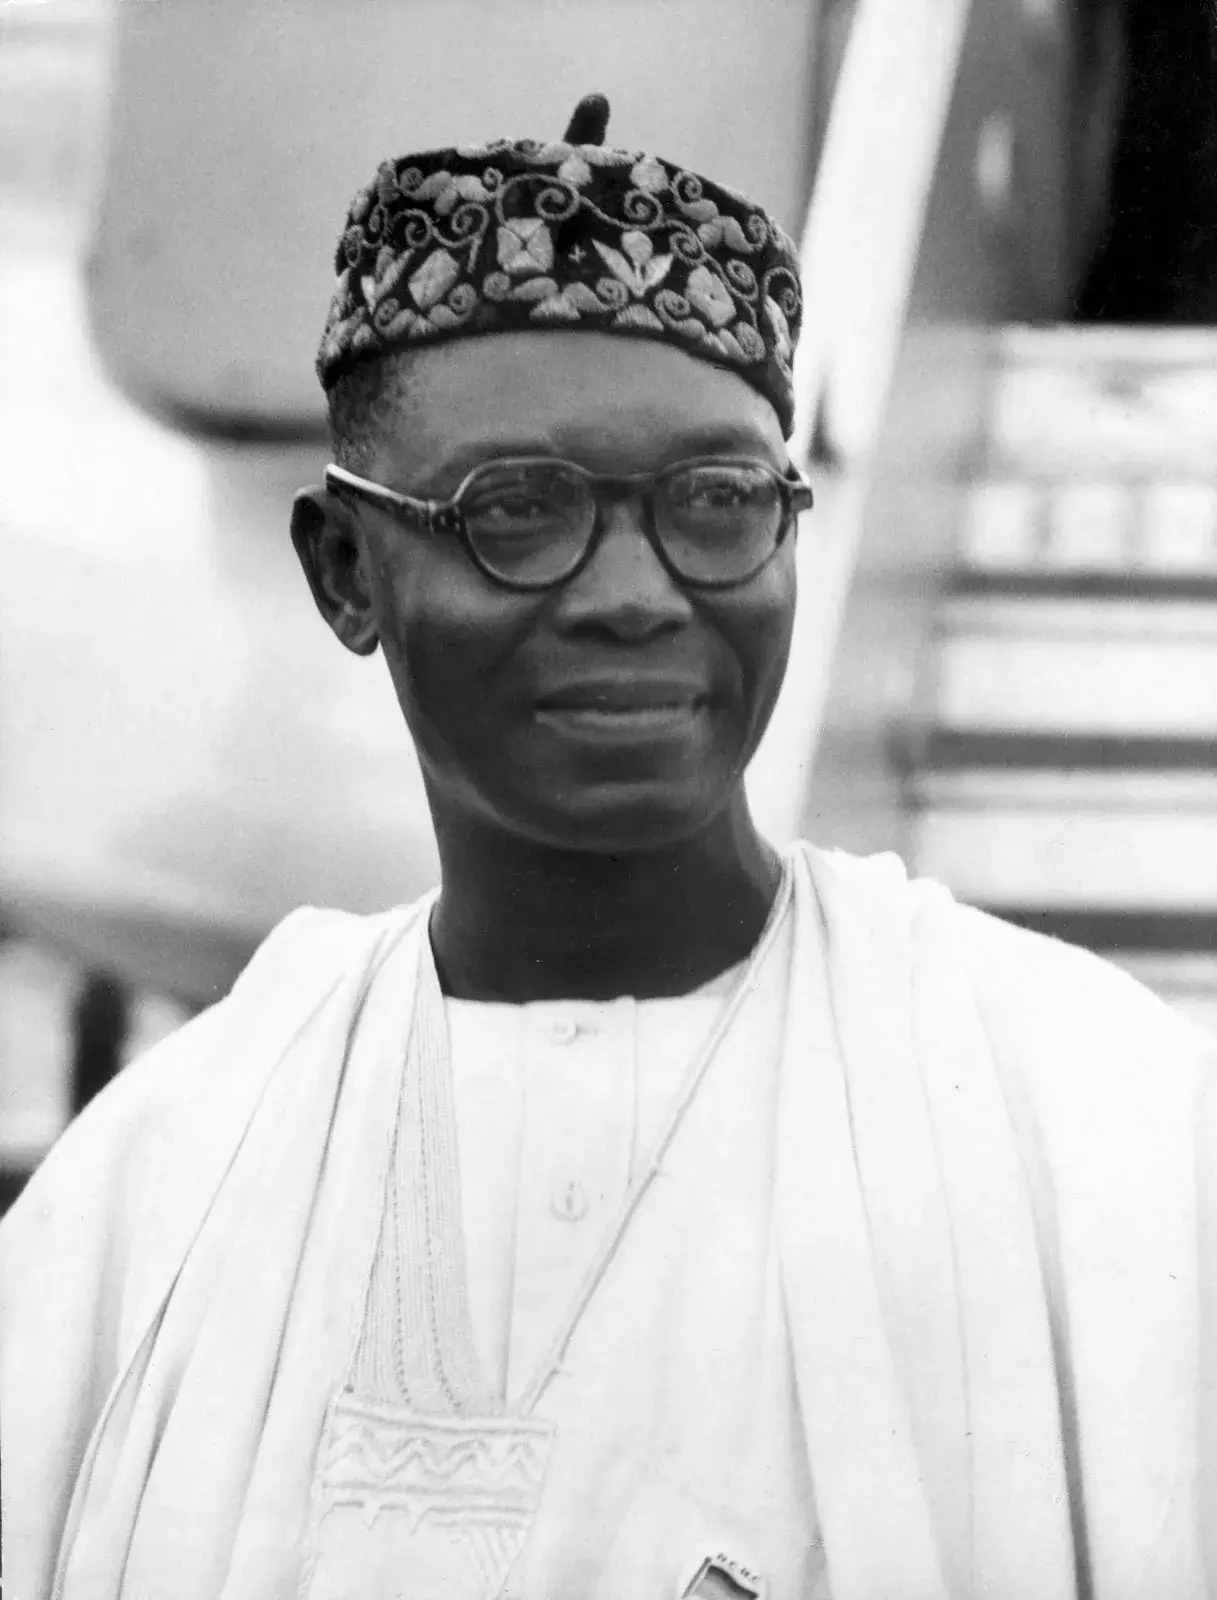 BENJAMIN NNAMDI “ZIK” AZIKIWE (1904-1996) - From Stowaway to Nigeria’s First President and African Nationalist - African Leaders Magazine 